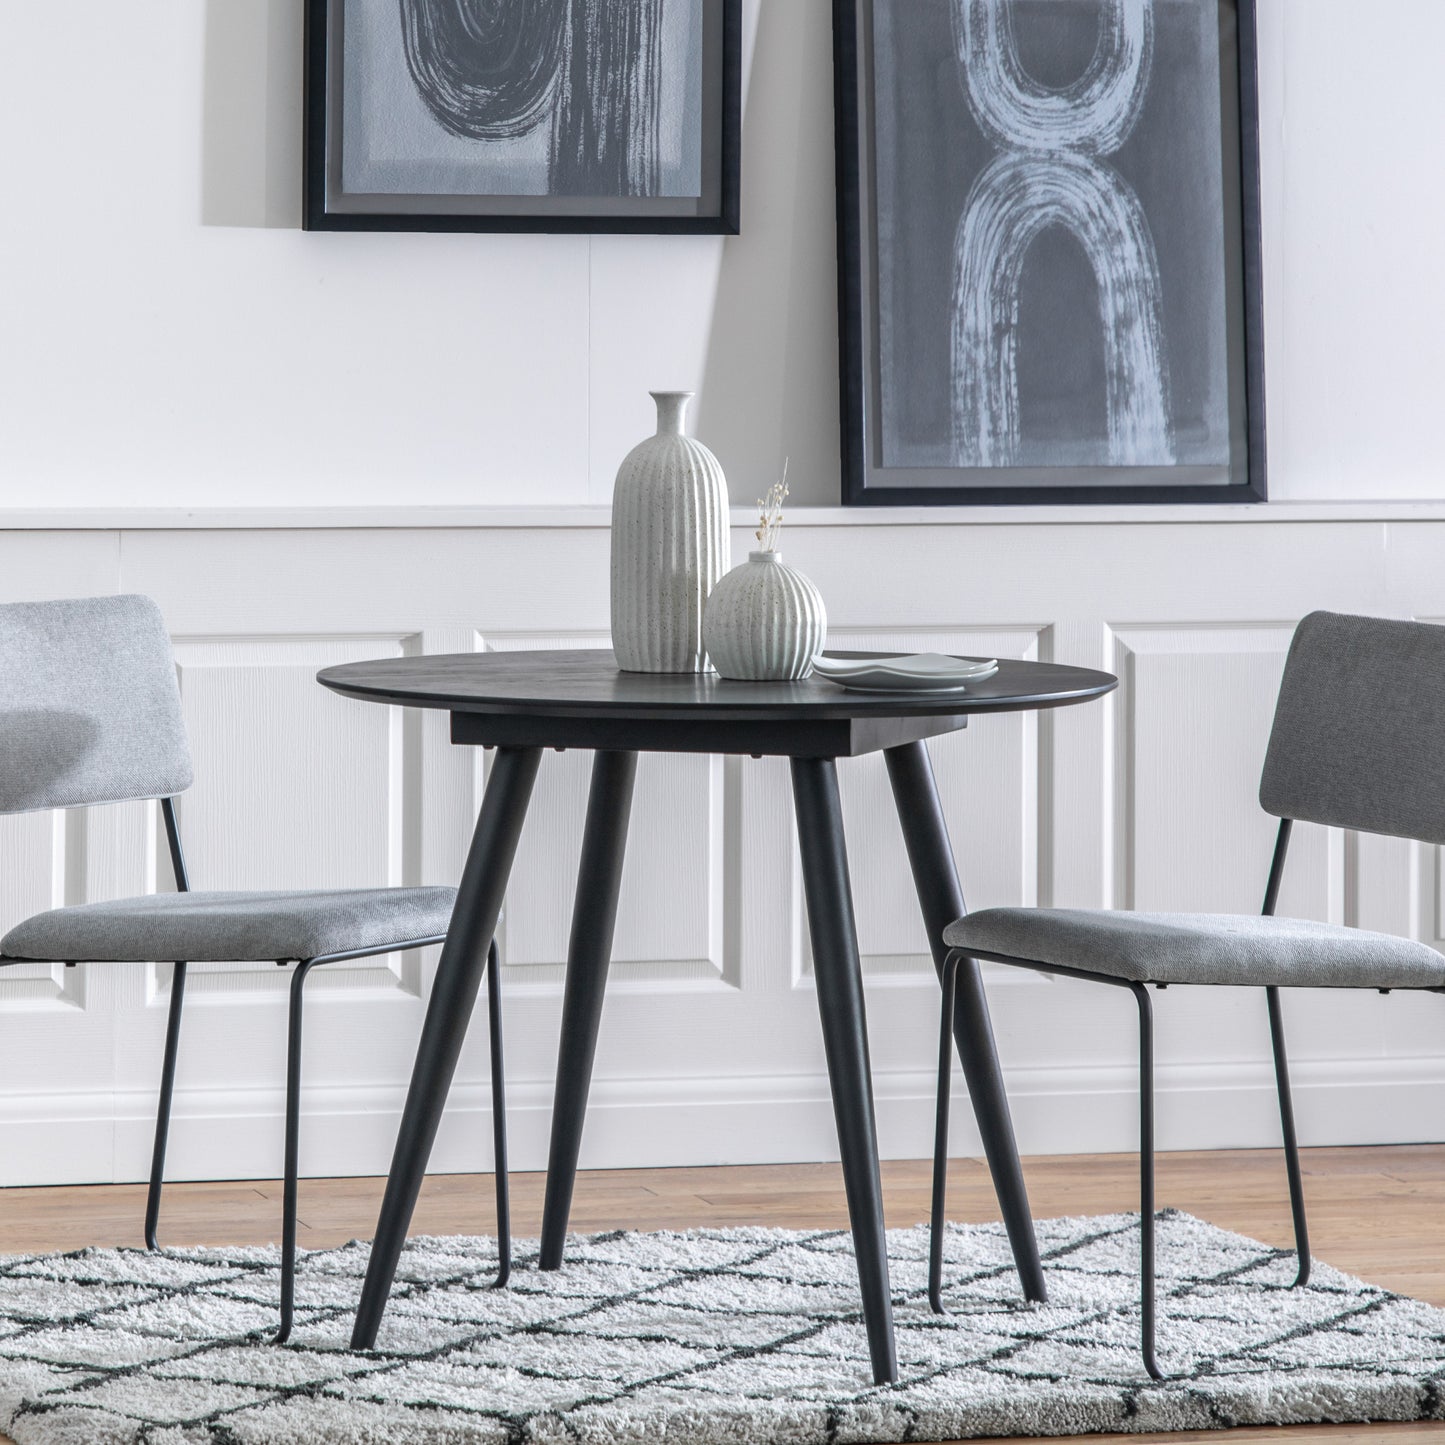 An Ashford Round Dining Table Black with two grey chairs for interior decor from Kikiathome.co.uk.